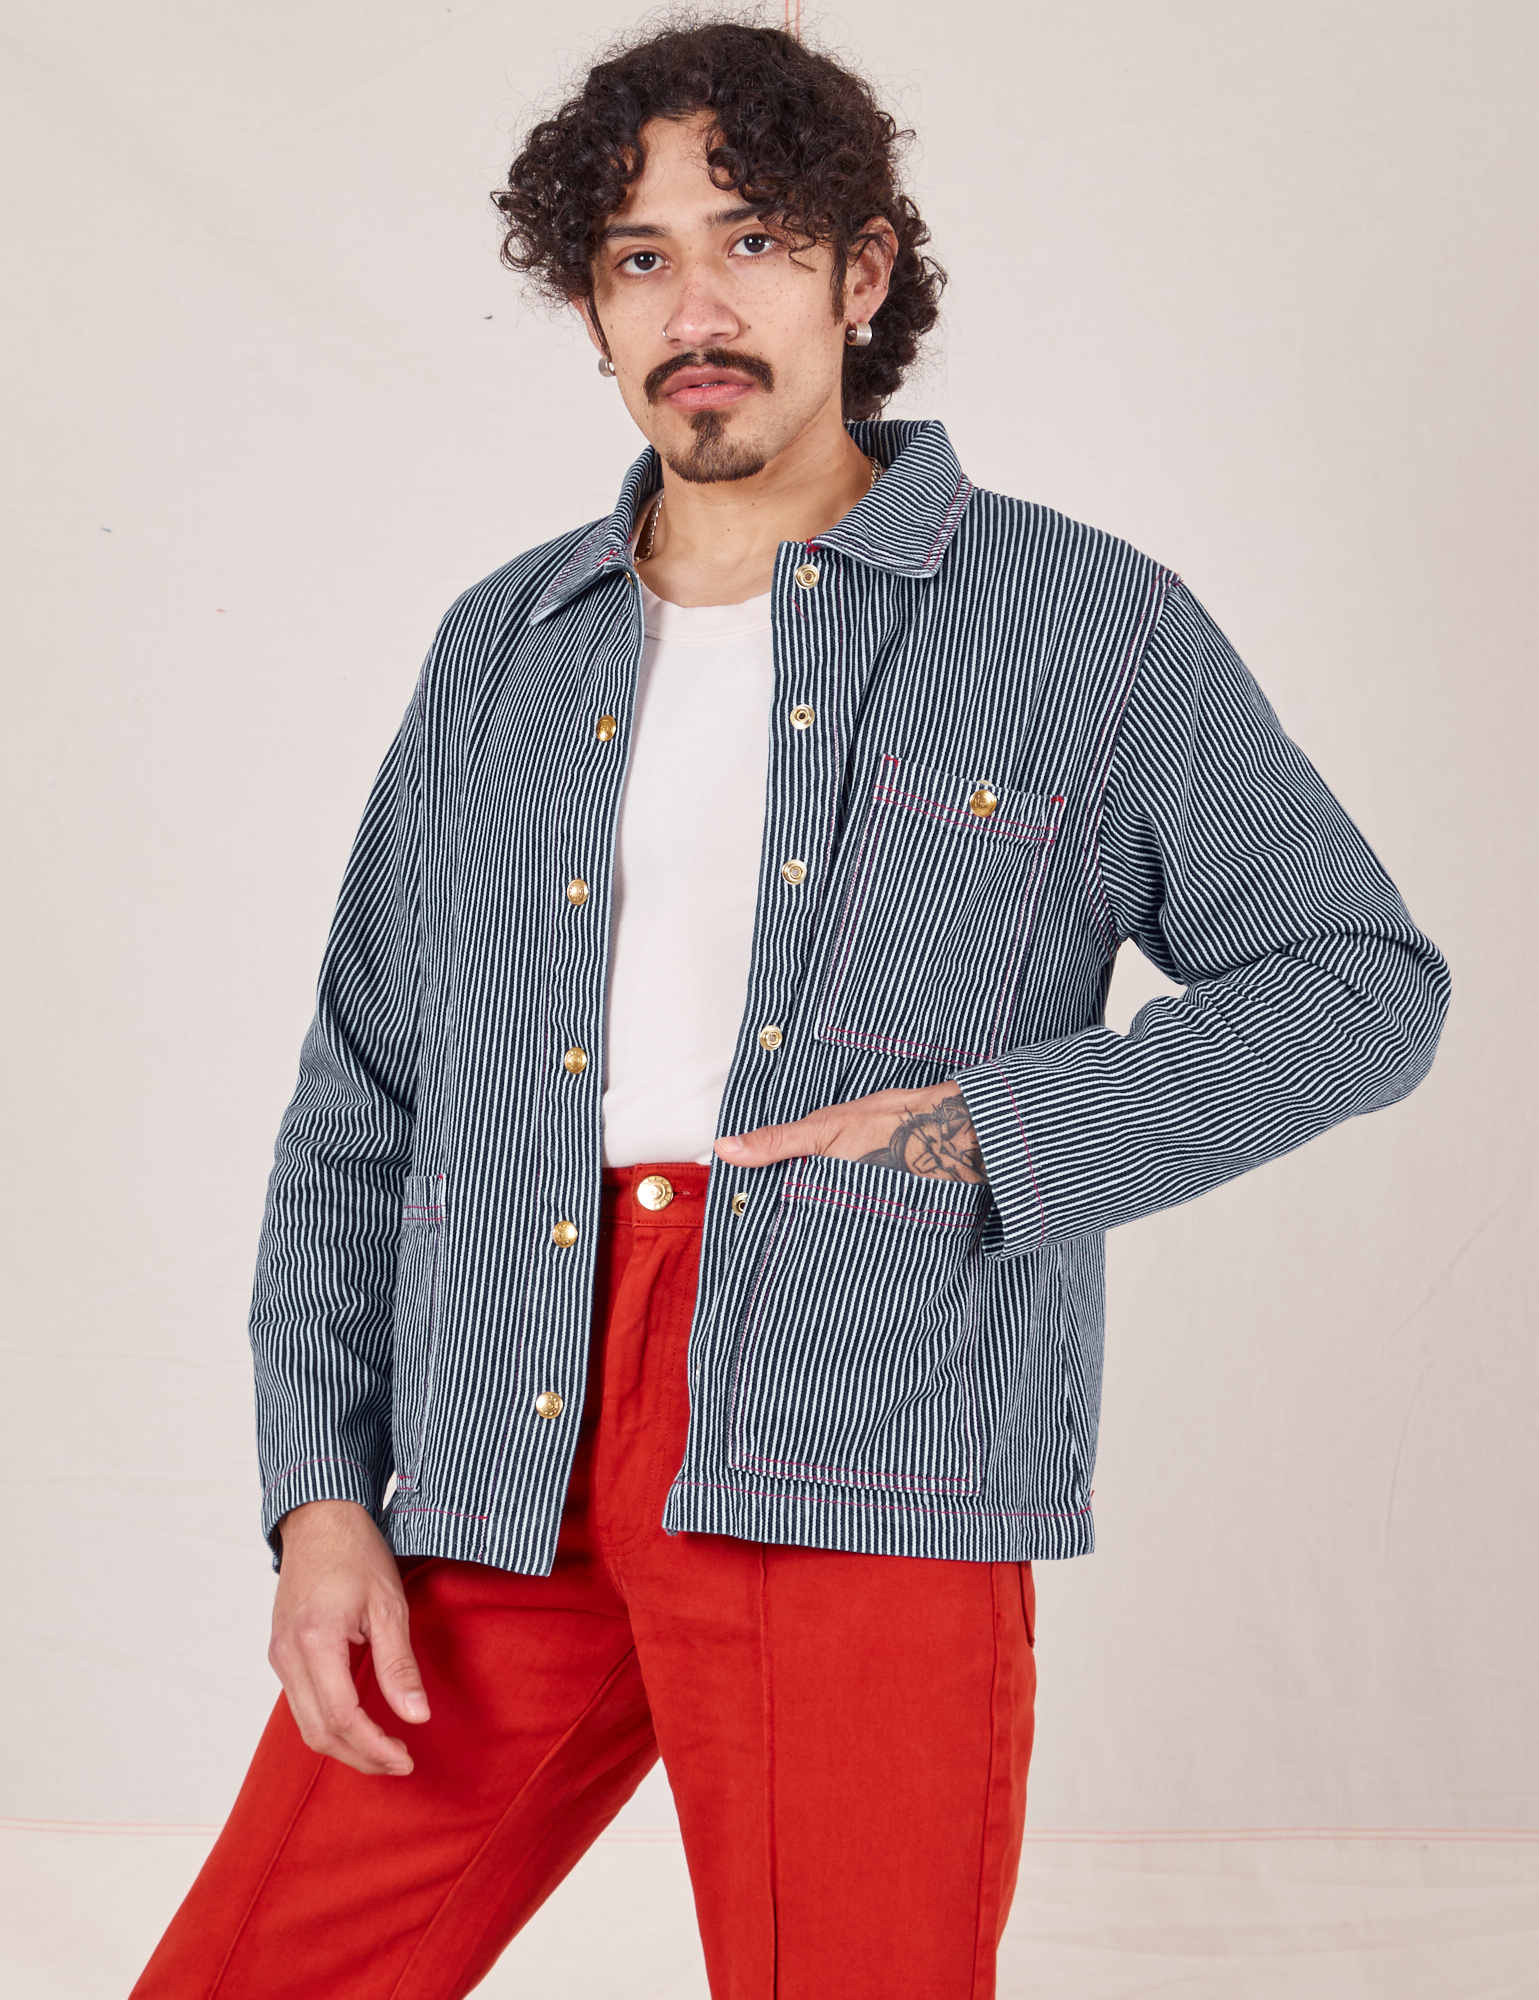 Jesse is 5&#39;8&quot; and wearing S Railroad Stripe Denim Work Jacket paired with paprika Western Pants